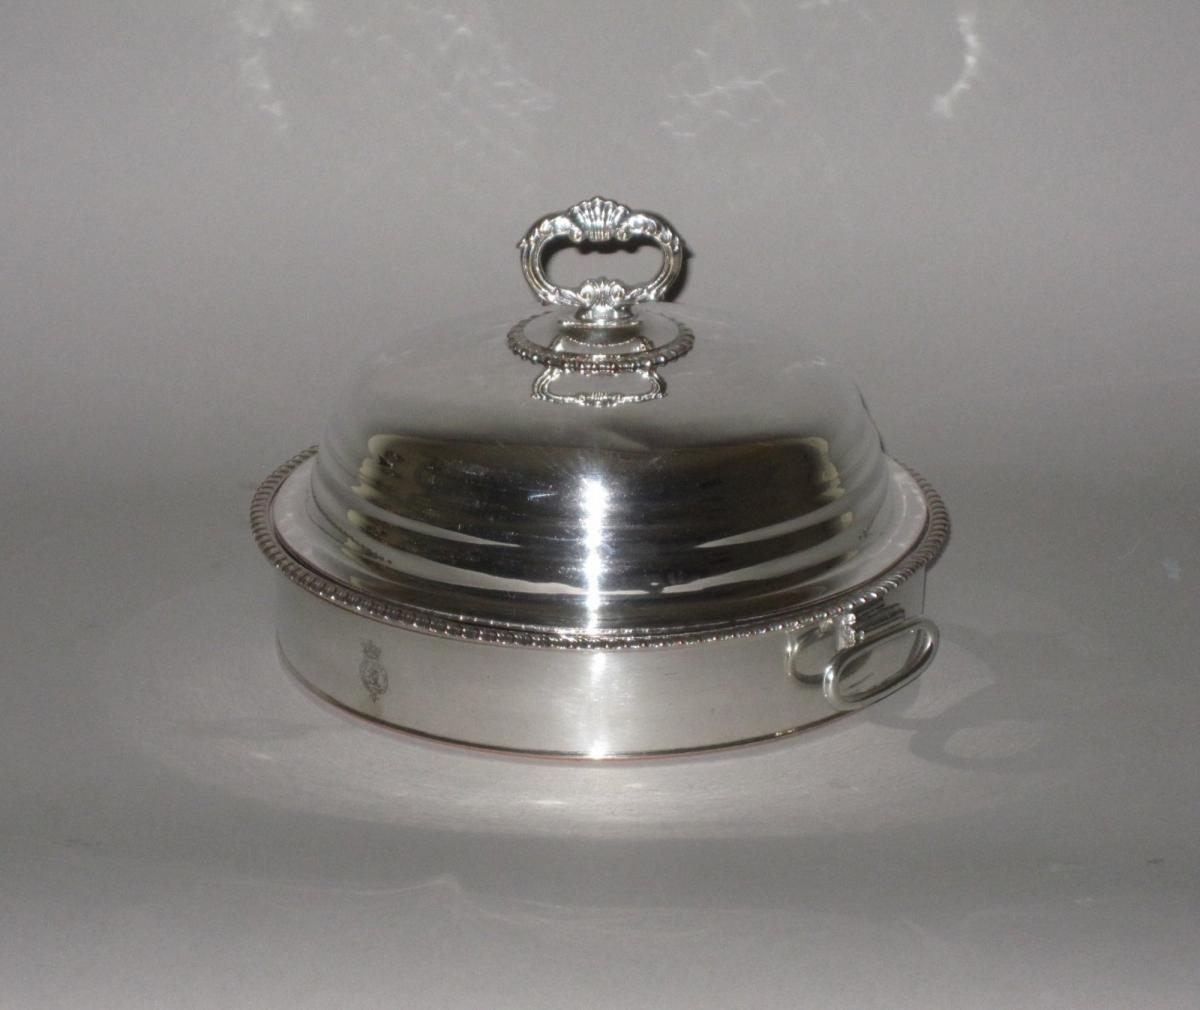 A SMALL ROUND OLD SHEFFIELD PLATE SILVER WARMING DISH & COVER, C. 1810